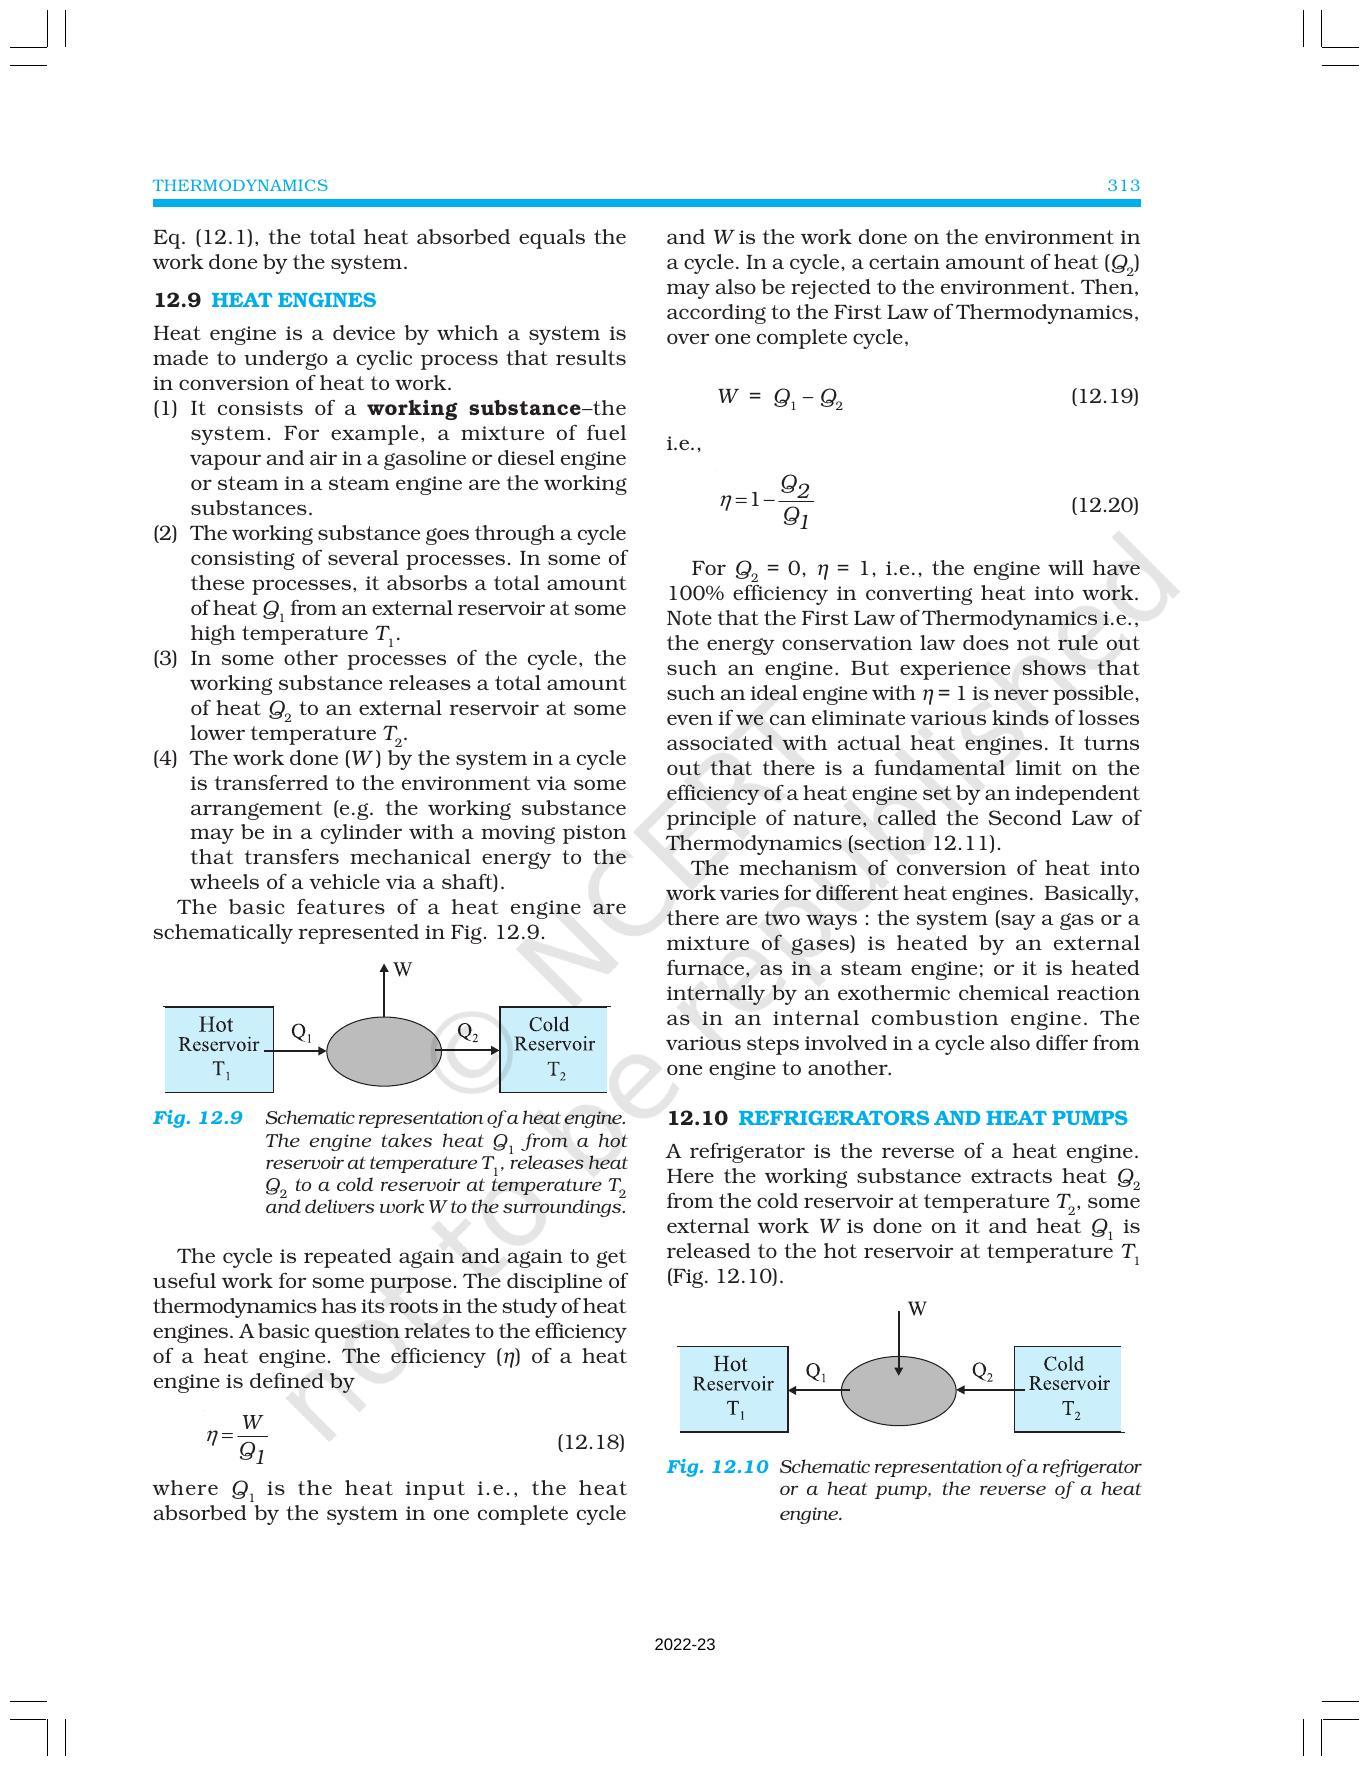 NCERT Book for Class 11 Physics Chapter 12 Thermodynamics - Page 11